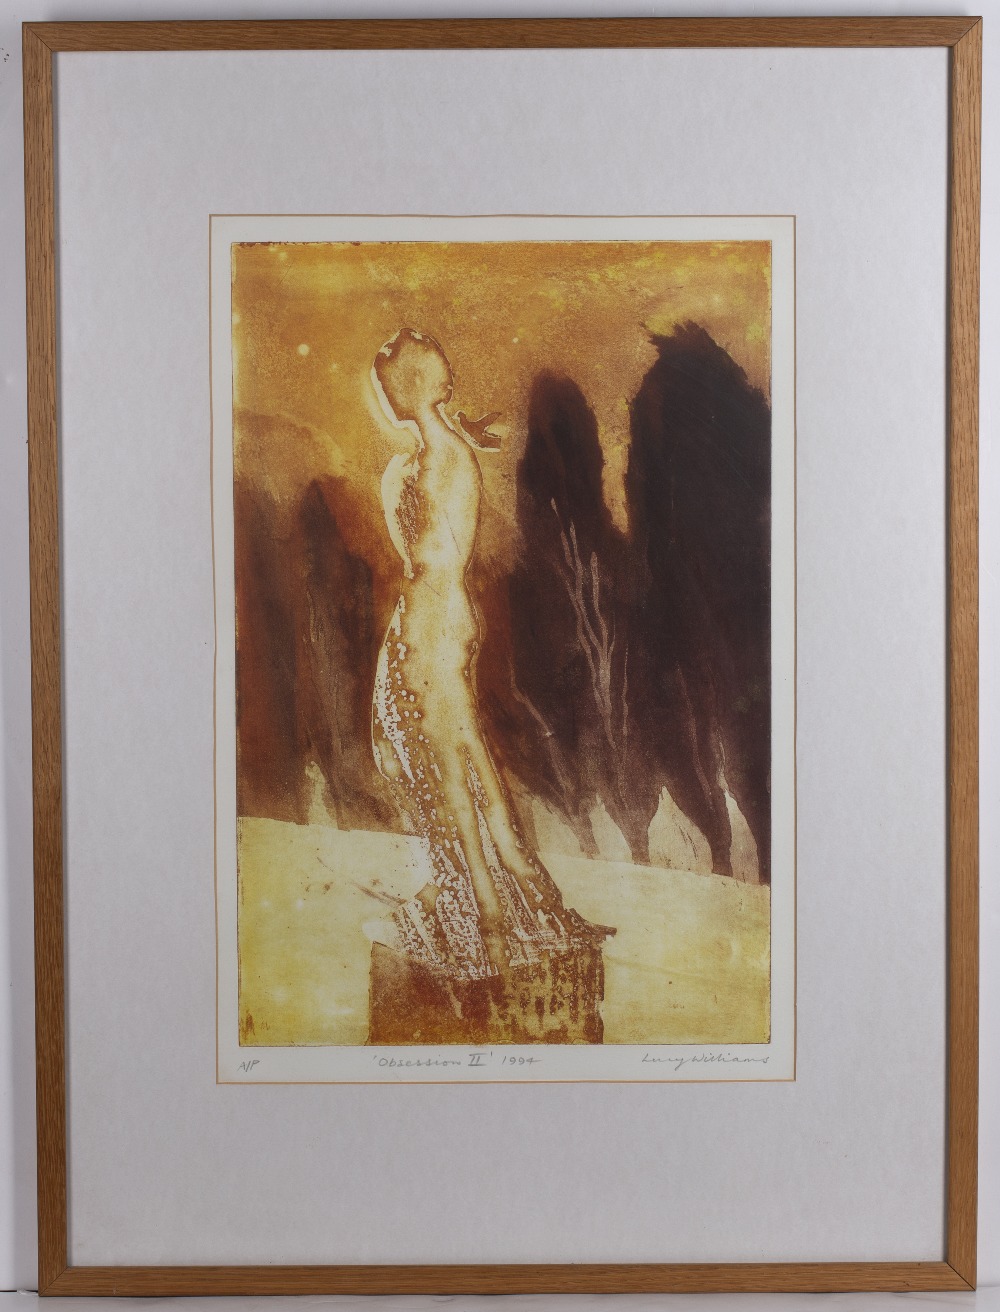 Lucy Williams (Contemporary) 'Obsession II' etching and aquatint, artists proof, signed and dated - Image 2 of 3